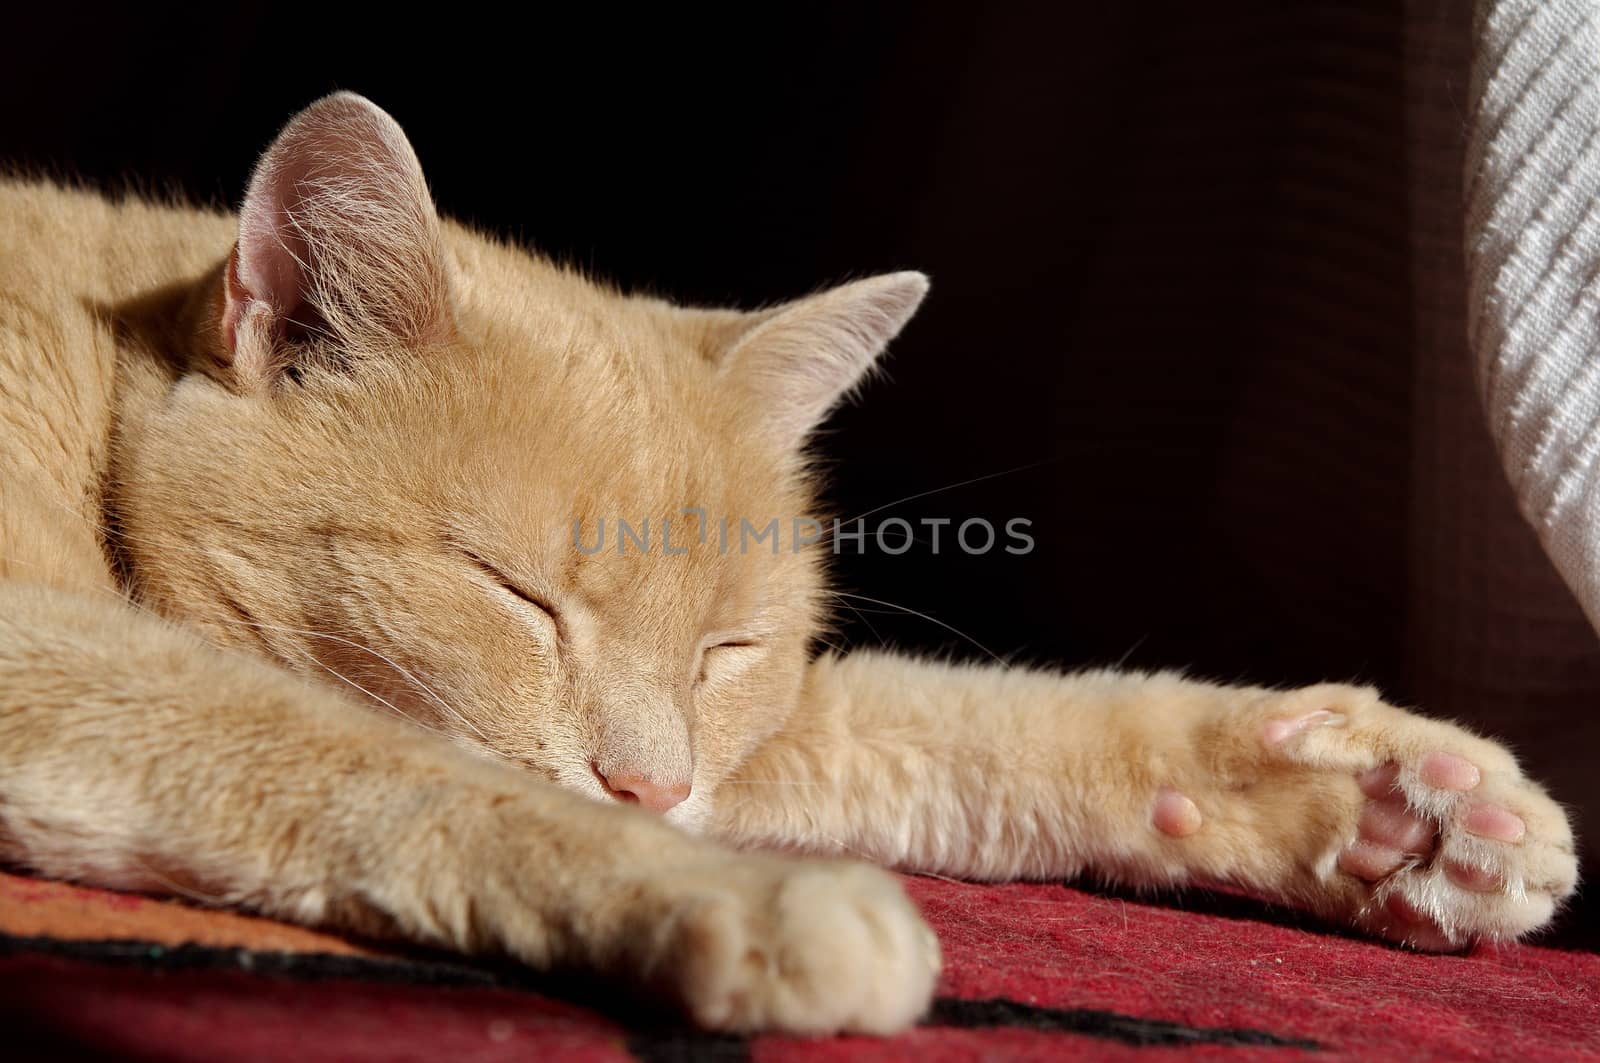 Ginger cat sleeping by anderm